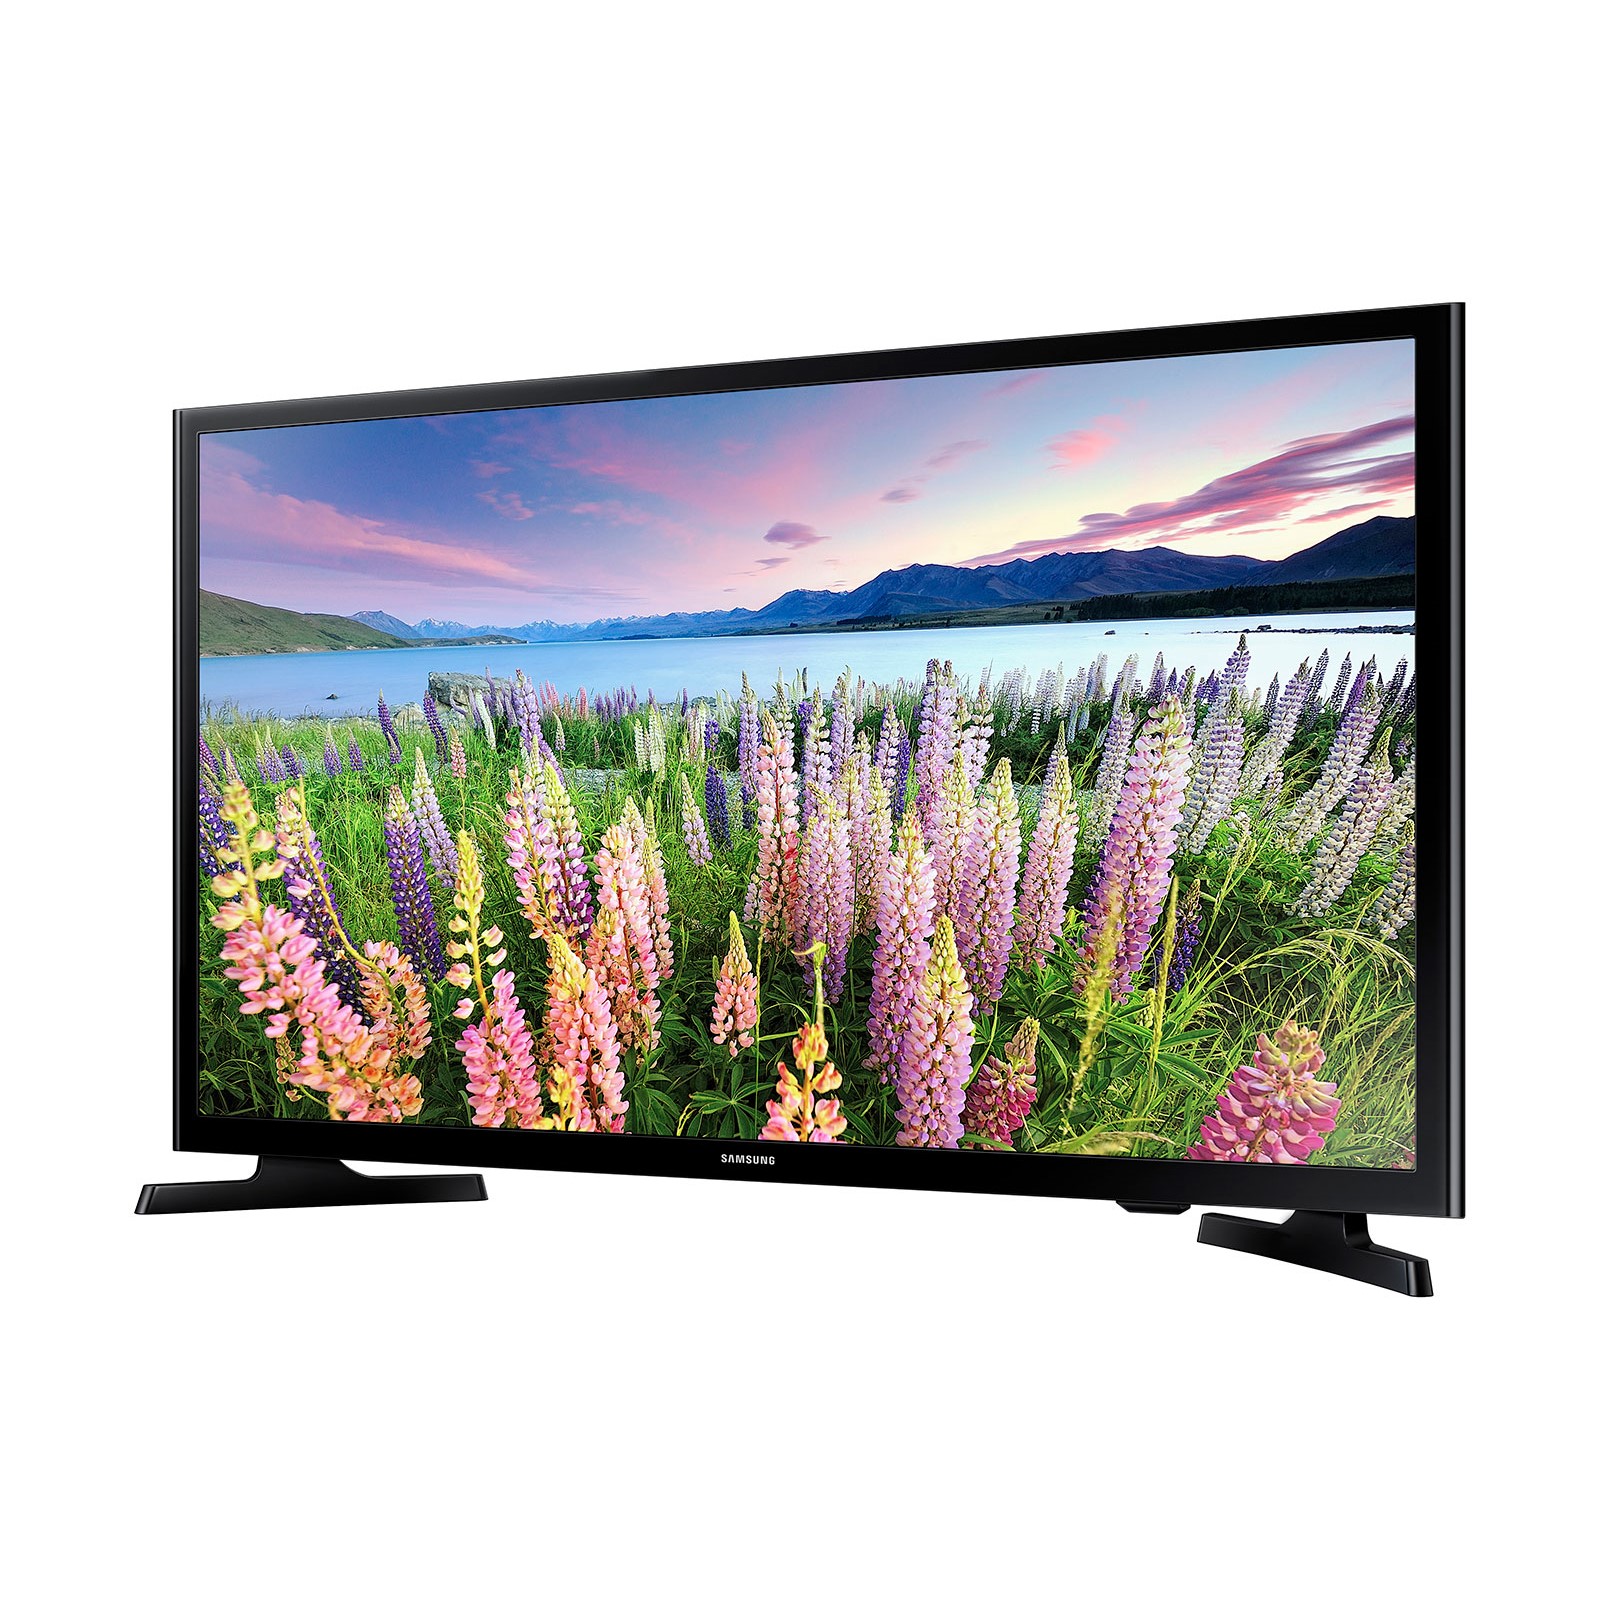 SAMSUNG 40" Class N5200 Series Full HD (1080P) LED Smart Television - UN40N5200AFXZA - image 3 of 5